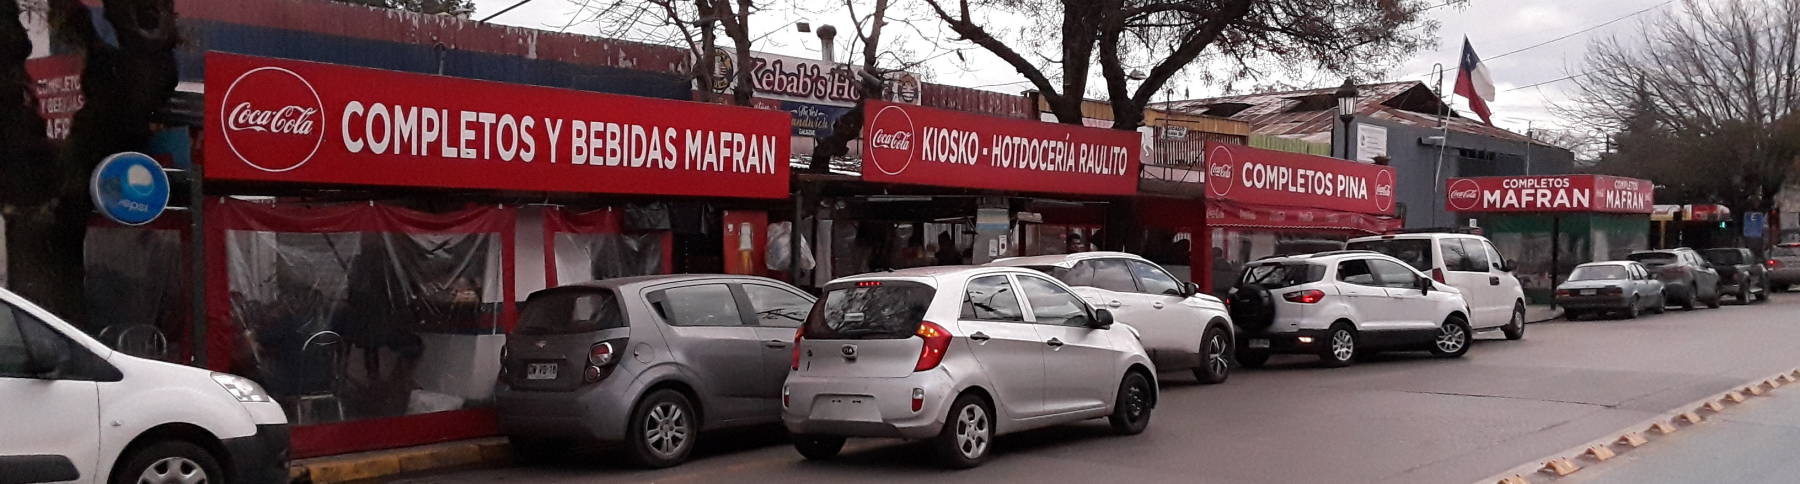 Businesses selling completos in Talca, Chile.